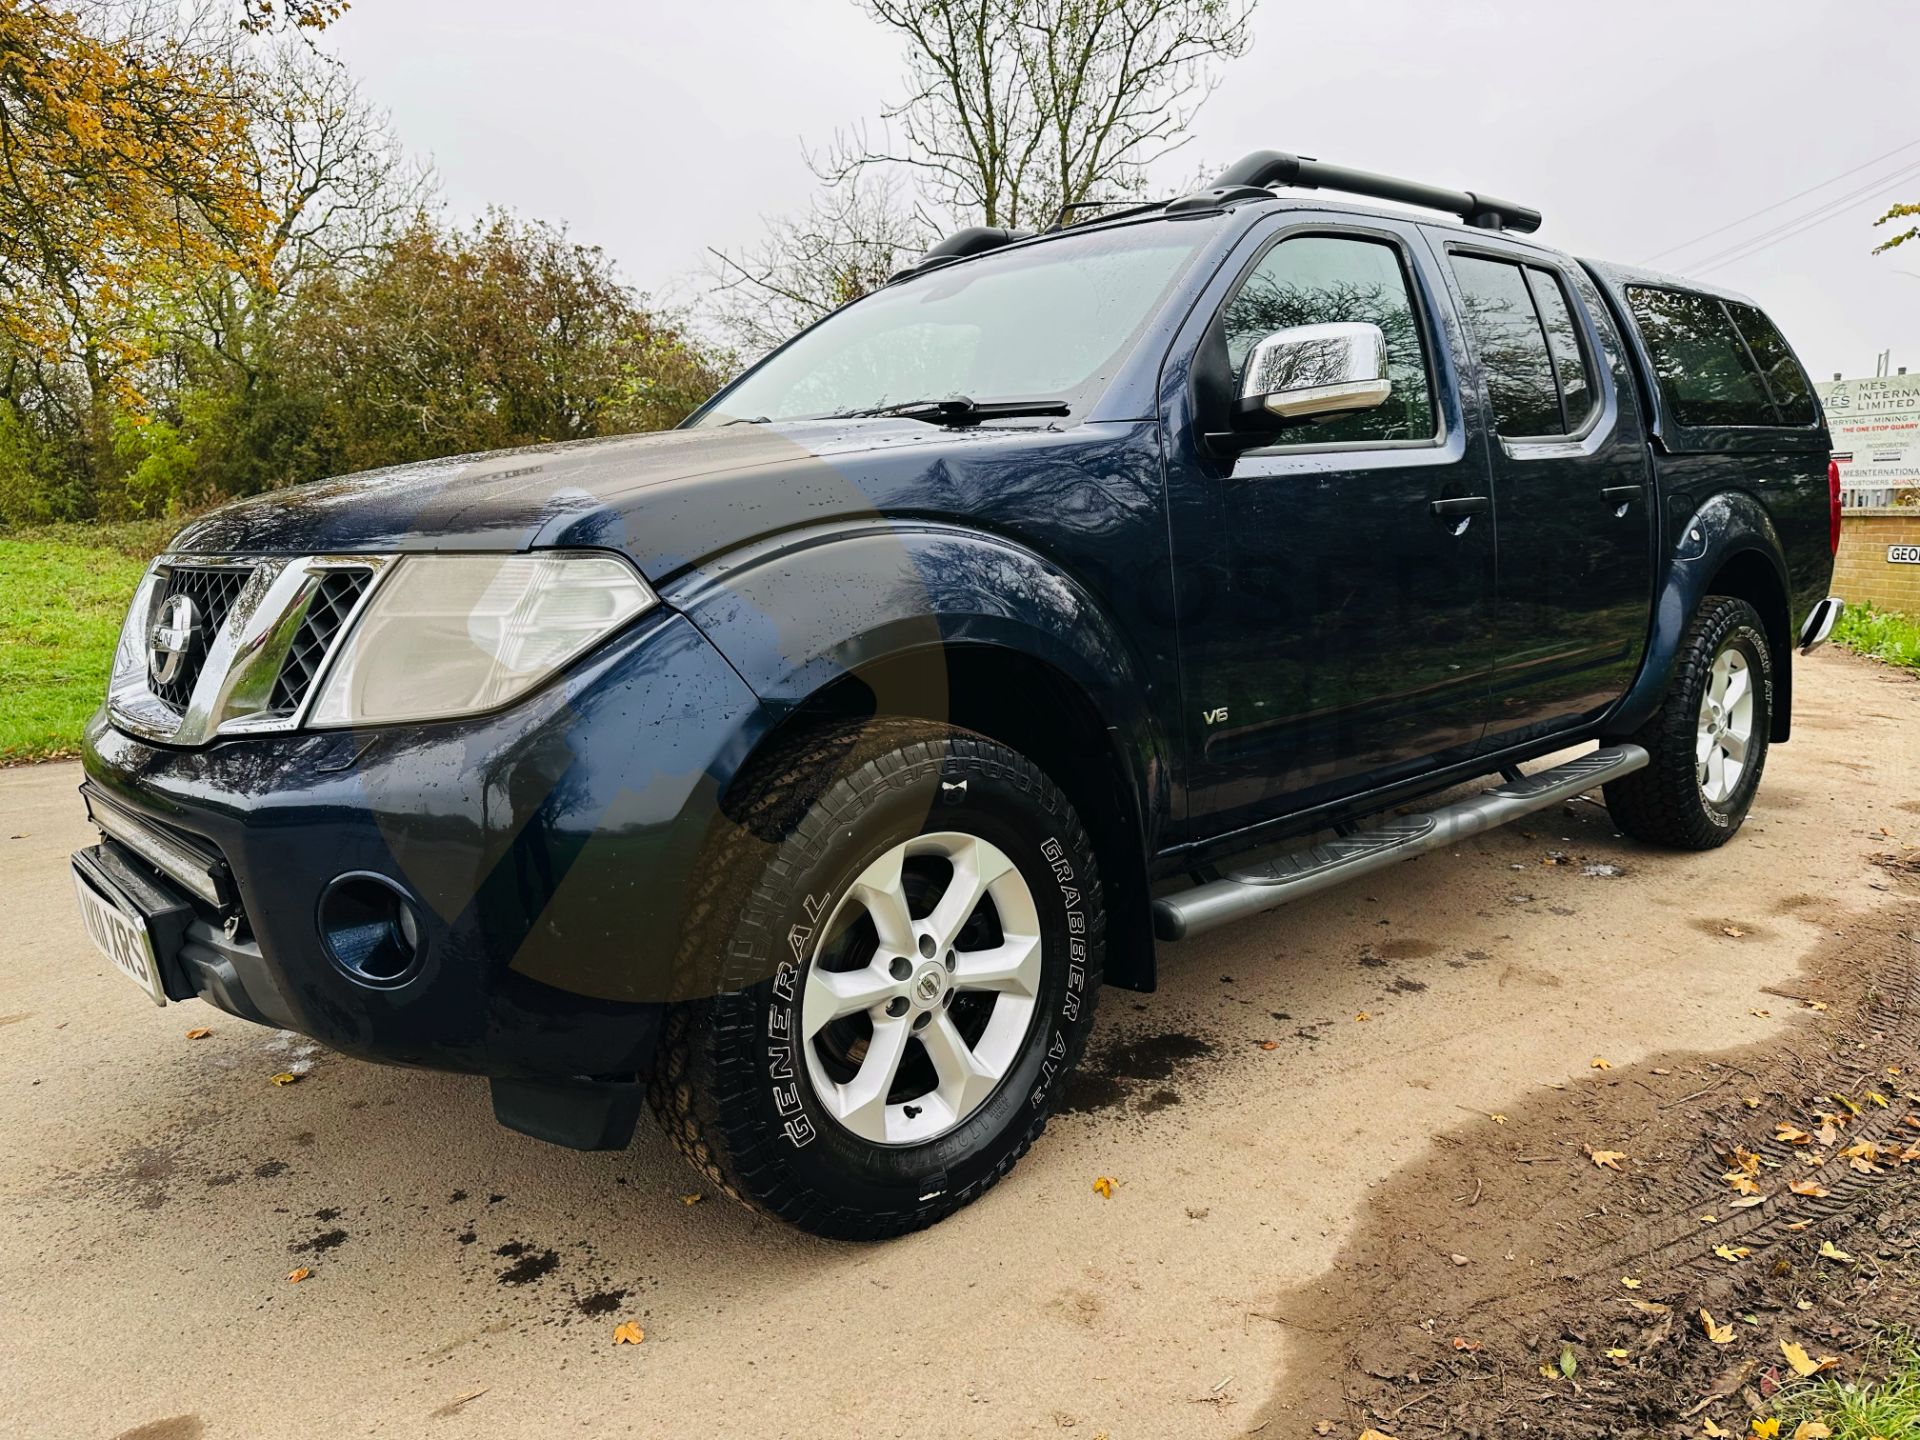 (ON SALE)NISSAN NAVARA *OUTLAW EDITION* 3.0 V6 TURBO DIESEL AUTOMATIC DOUBLE CAB PICKUP - 11 REG - Image 8 of 43